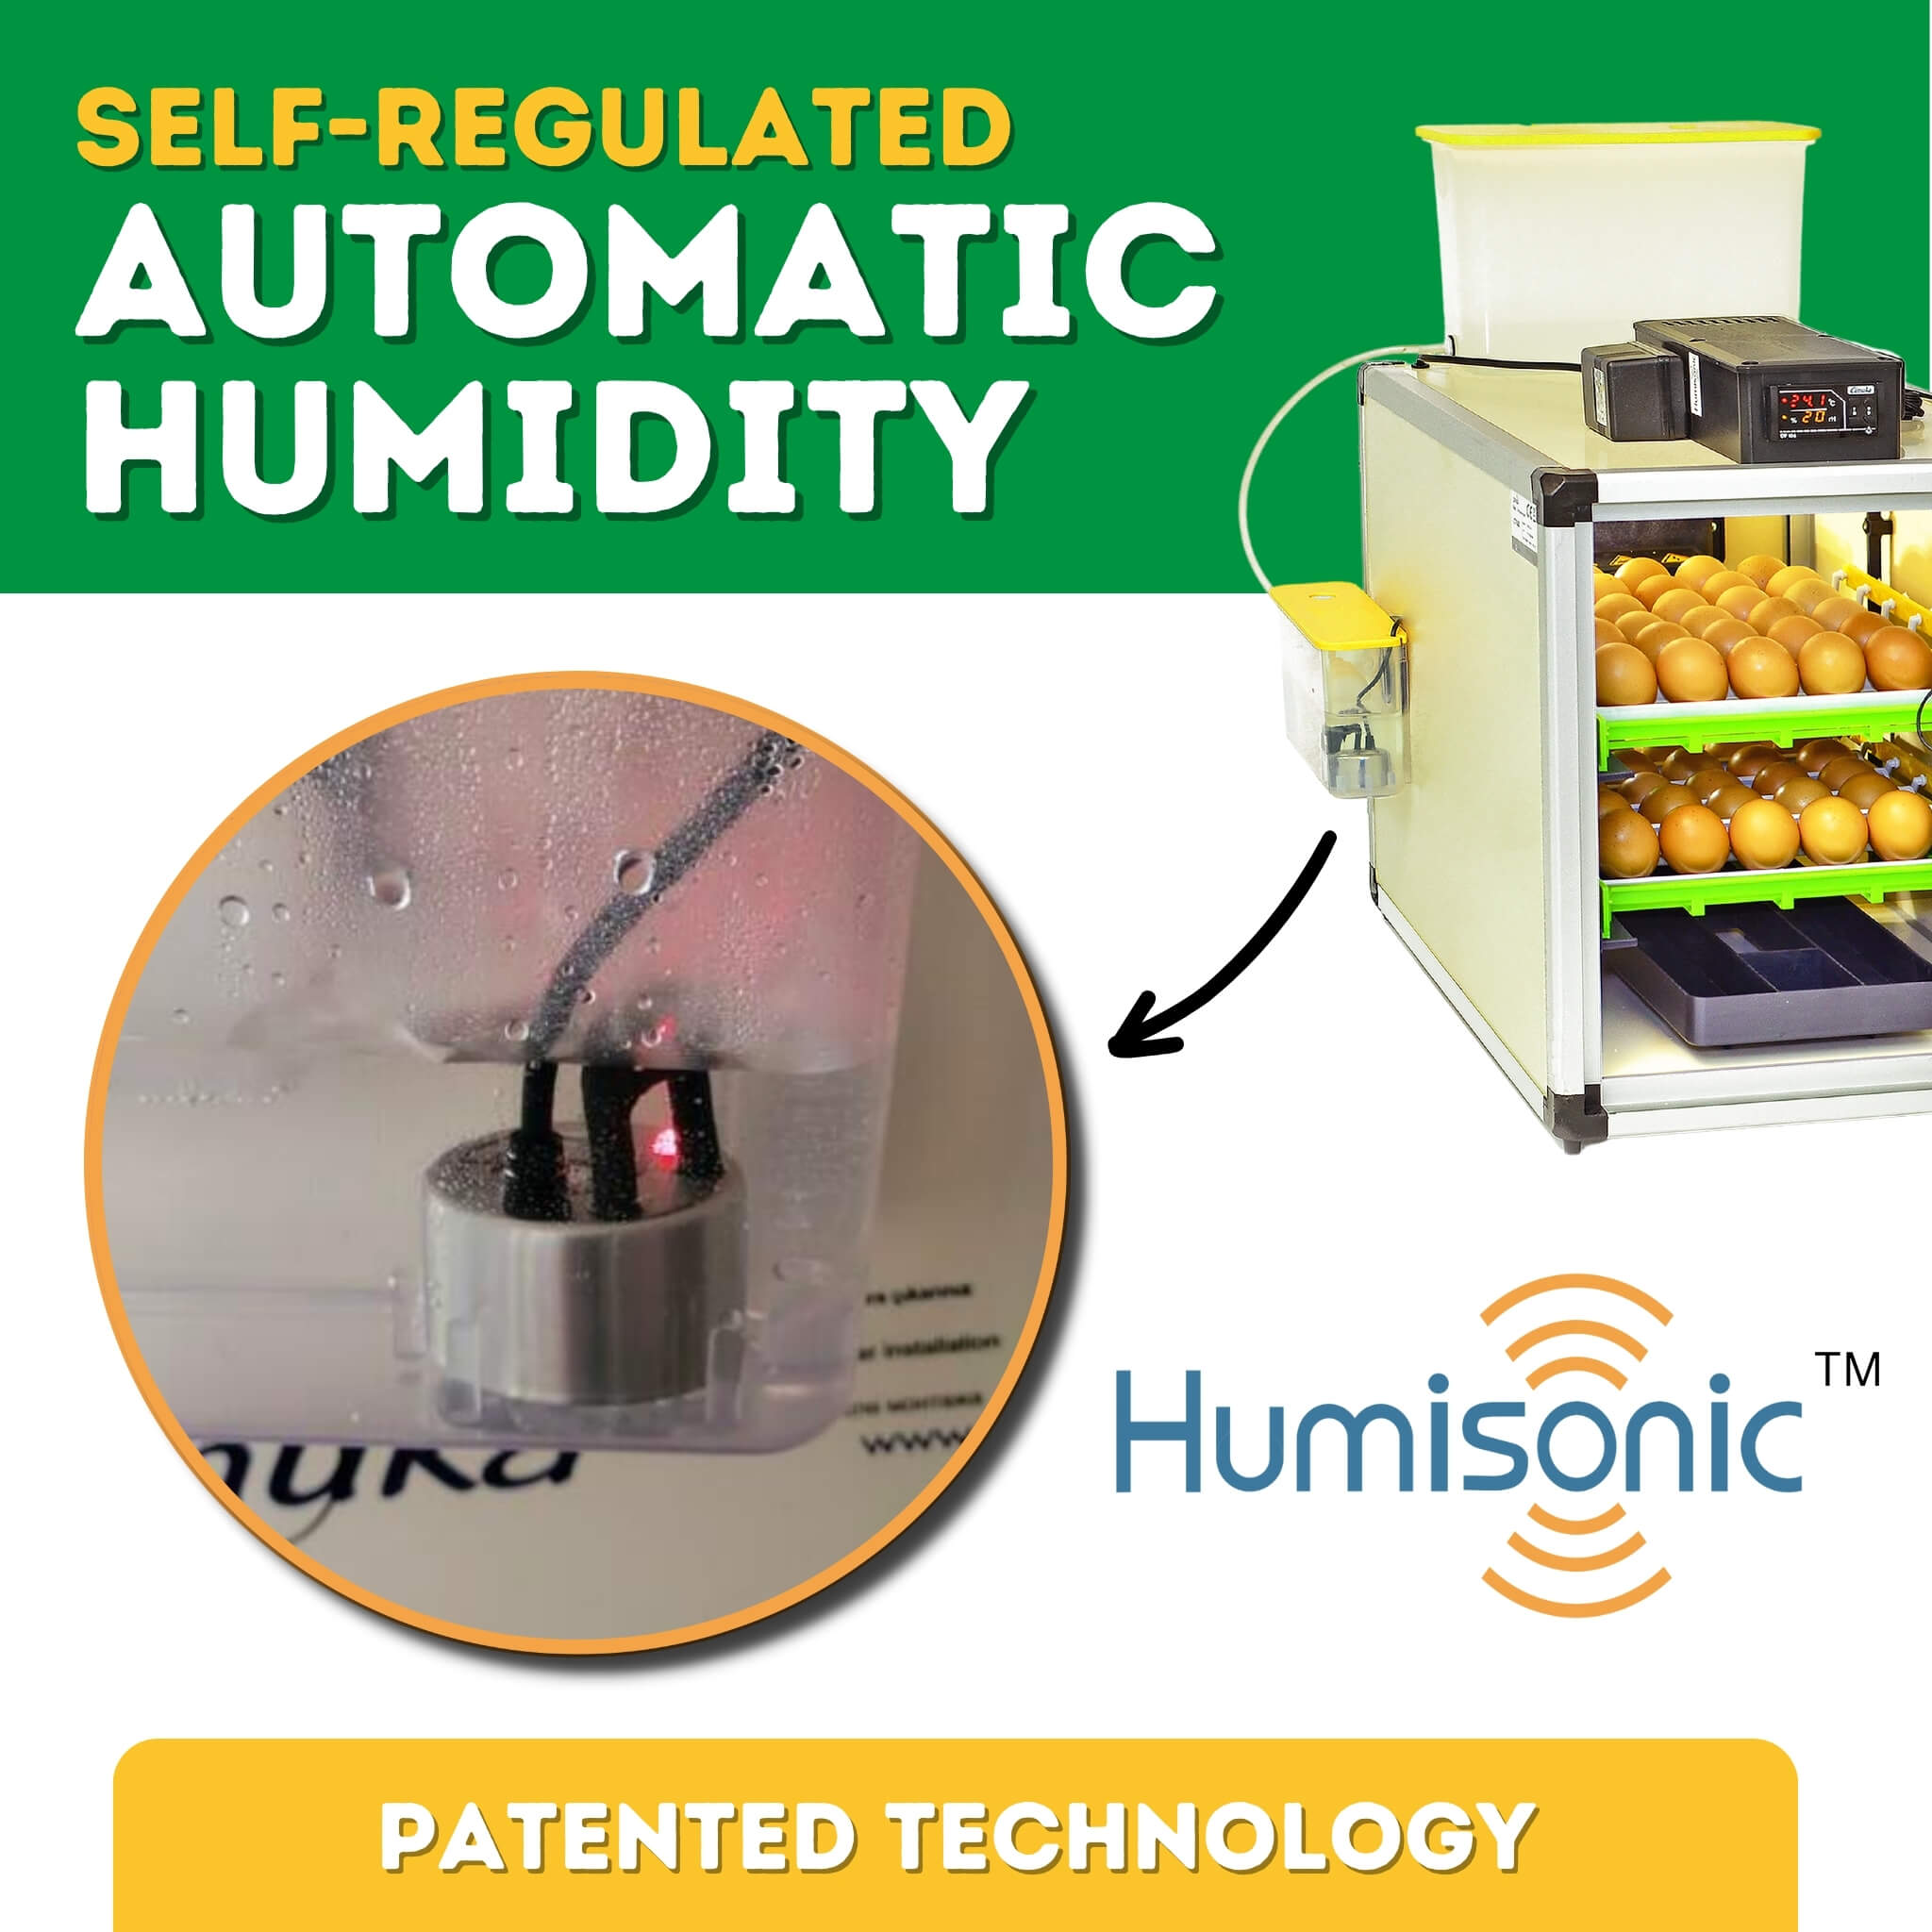 Showing patented Humisonic technology that provides accurate and stable humidity within automatic egg incubator.